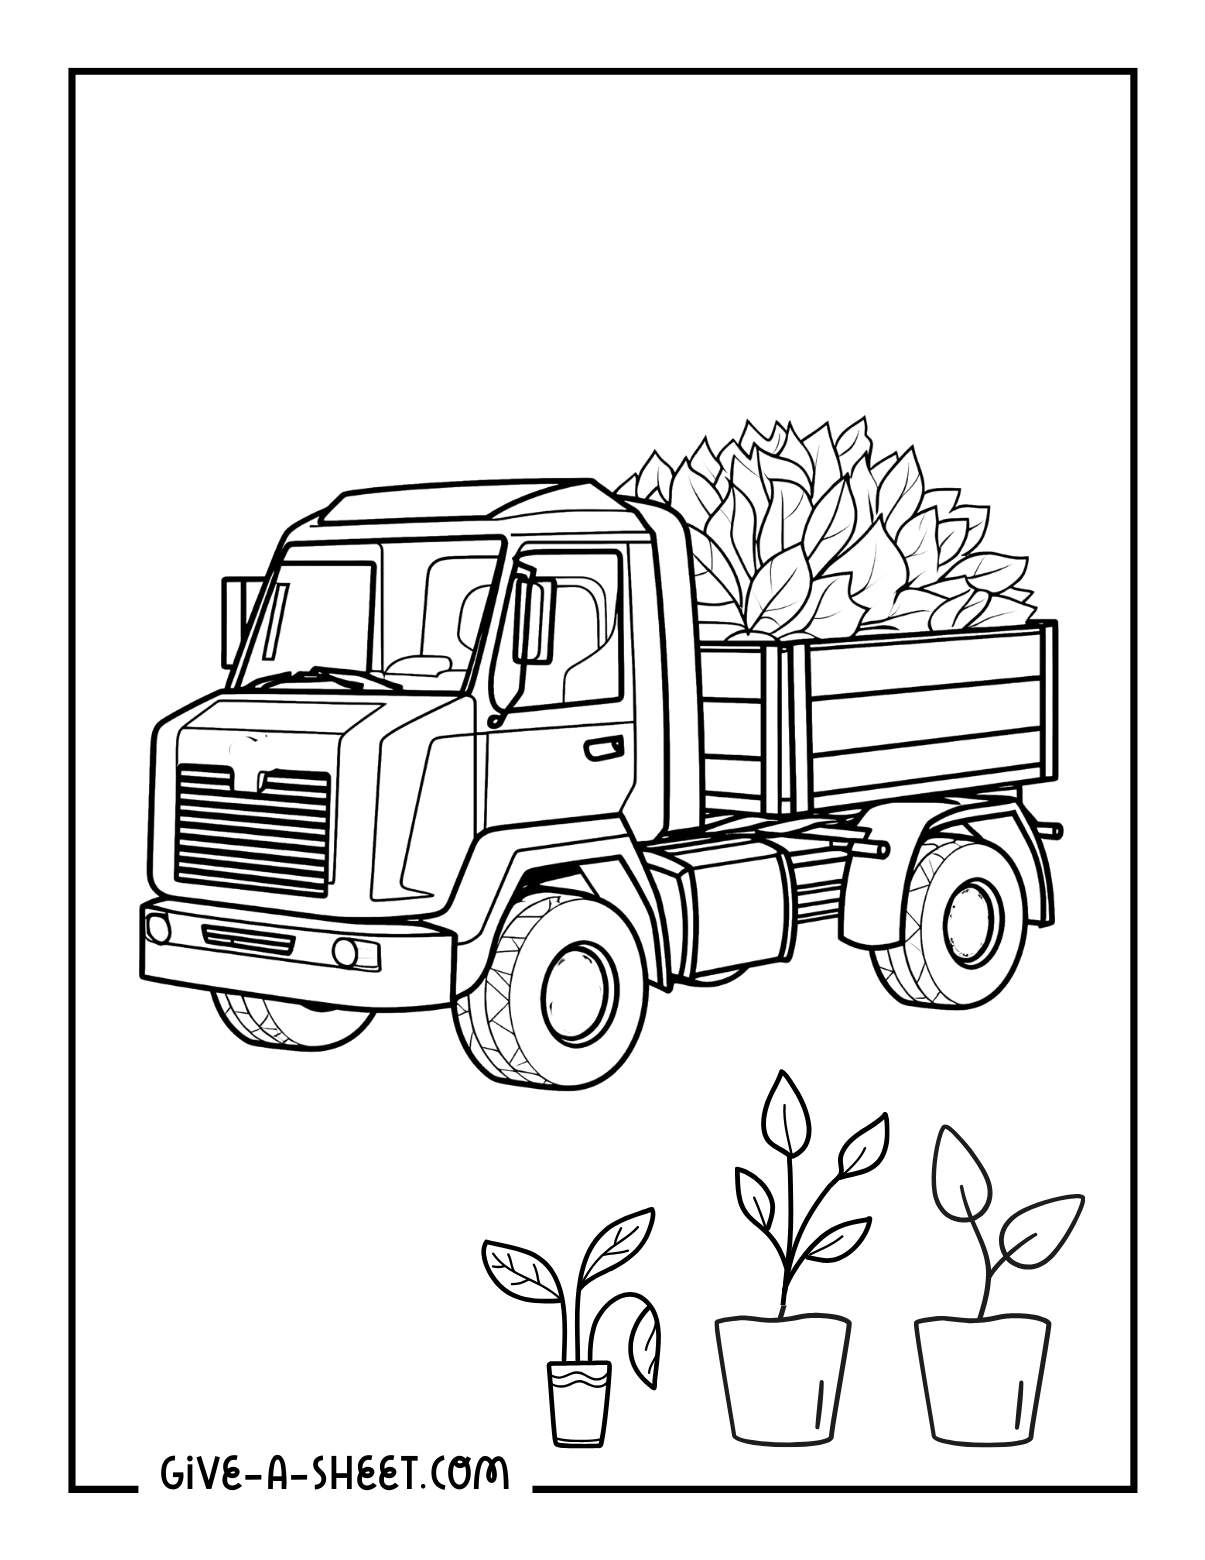 Landscaping truck coloring page with plants.